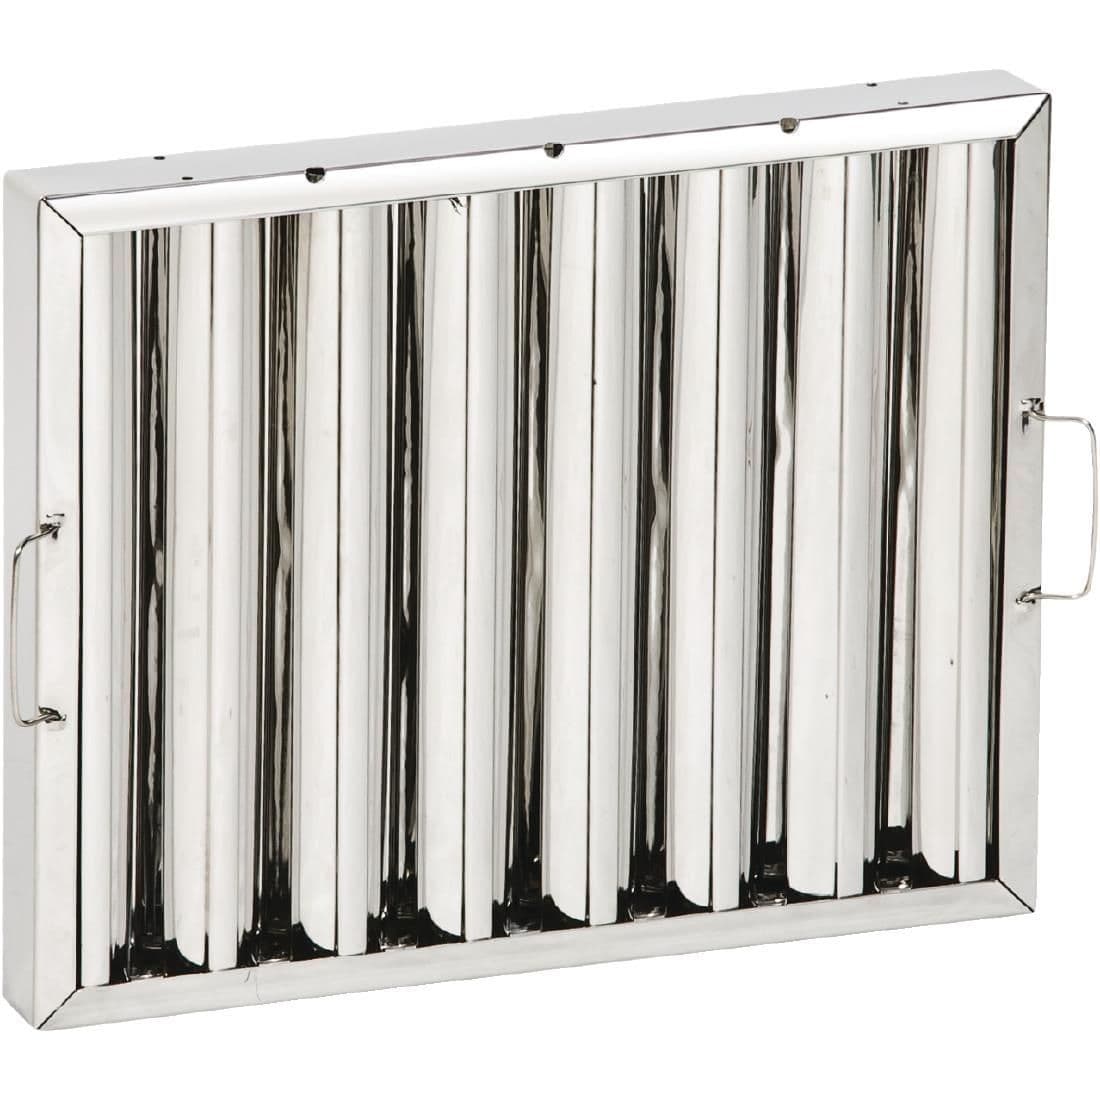 Kitchen Canopy Baffle Filter 400 x 400mm JD Catering Equipment Solutions Ltd